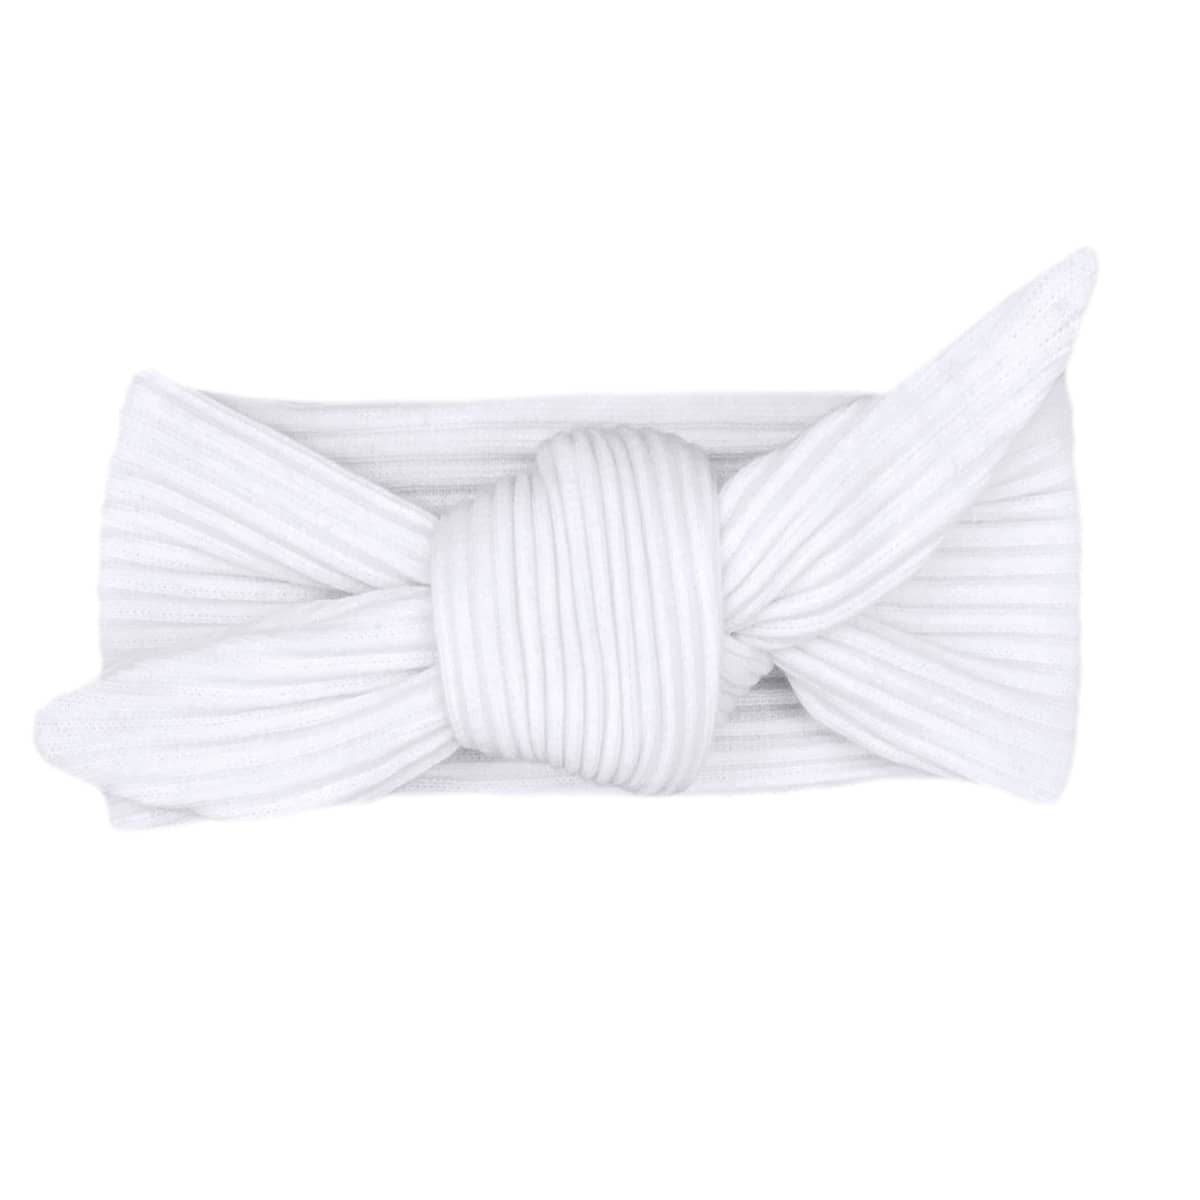 Bowy Made Ribbed Head Tie - White